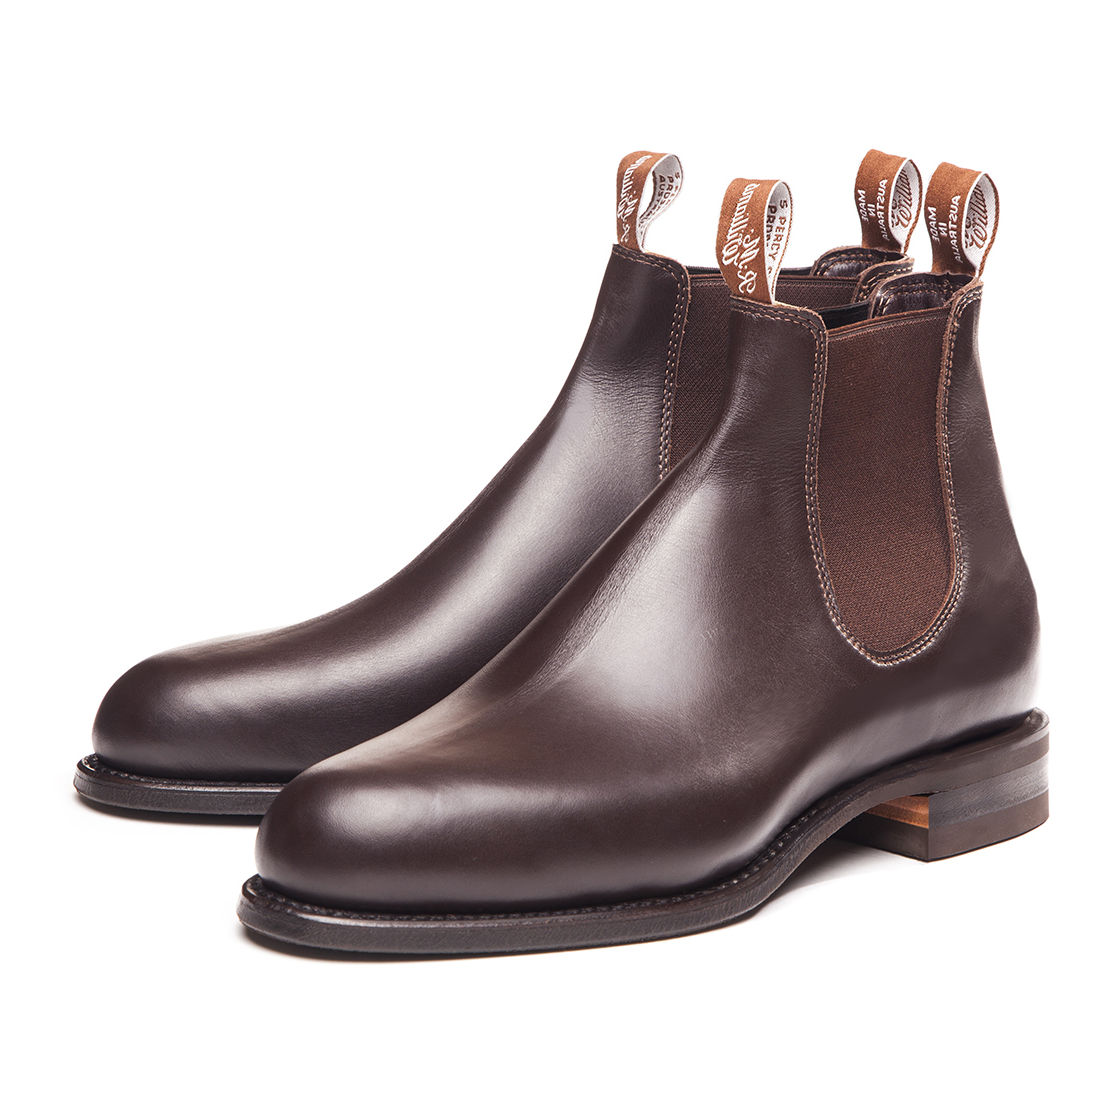 rm williams turnout boots